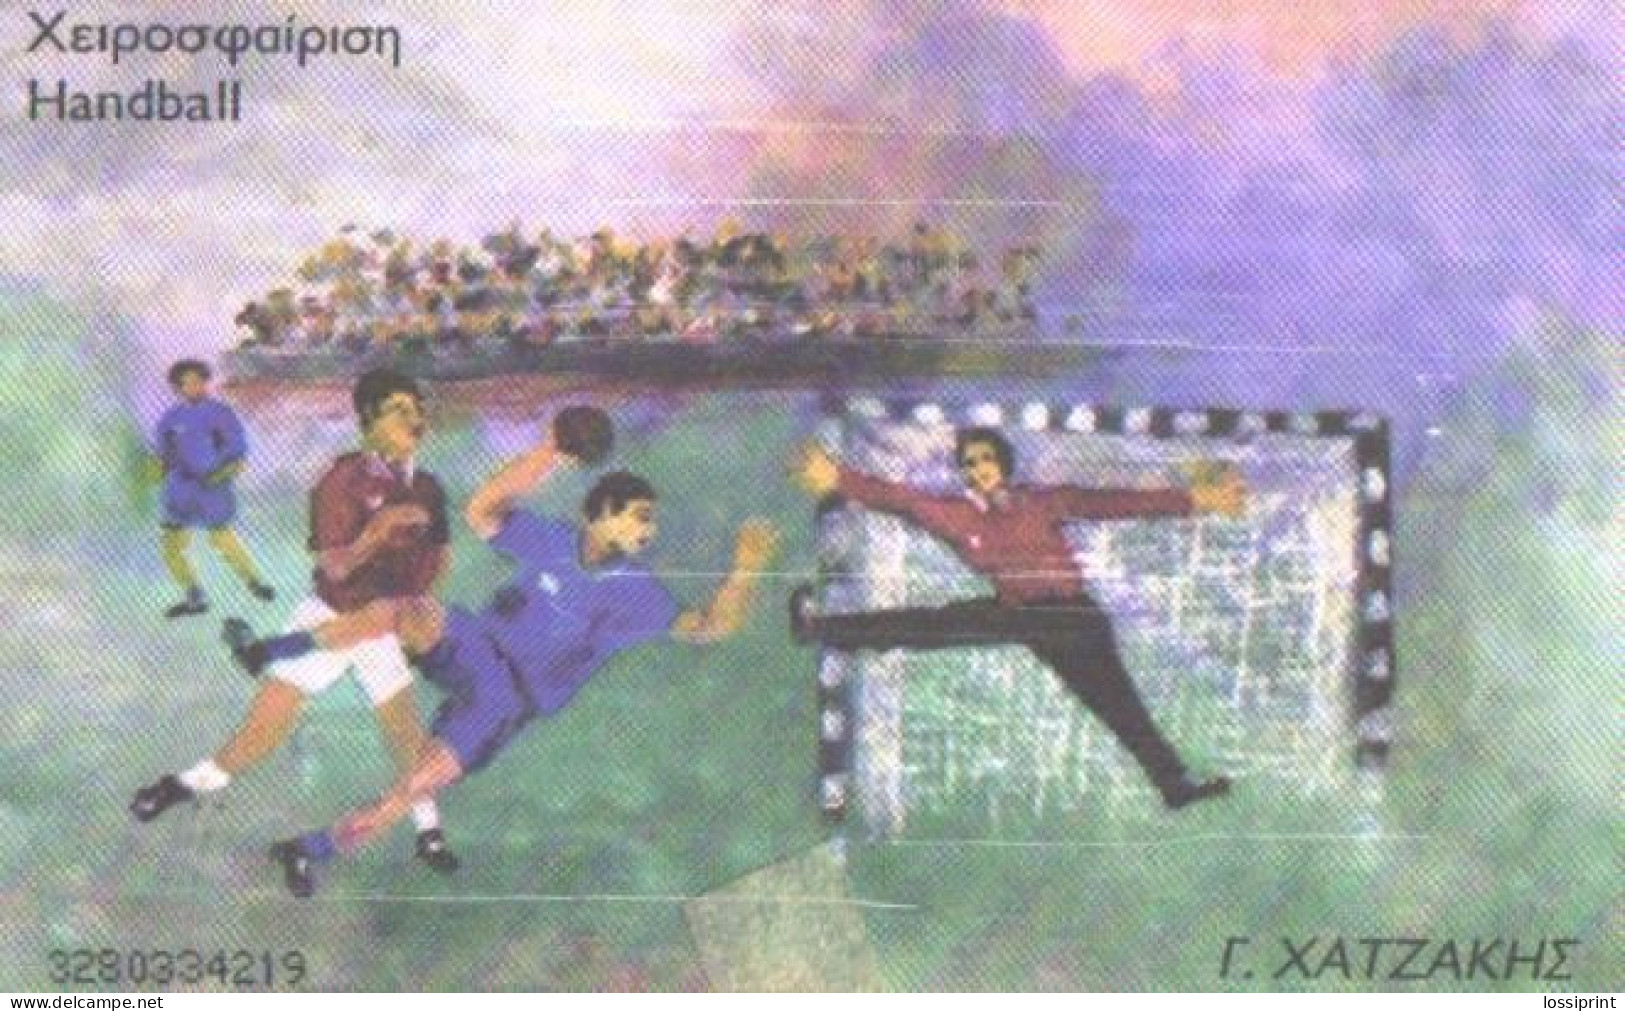 Greece:Used Phonecard, OTE, 3€, Athens Olympig Games 2004, Handball - Olympic Games